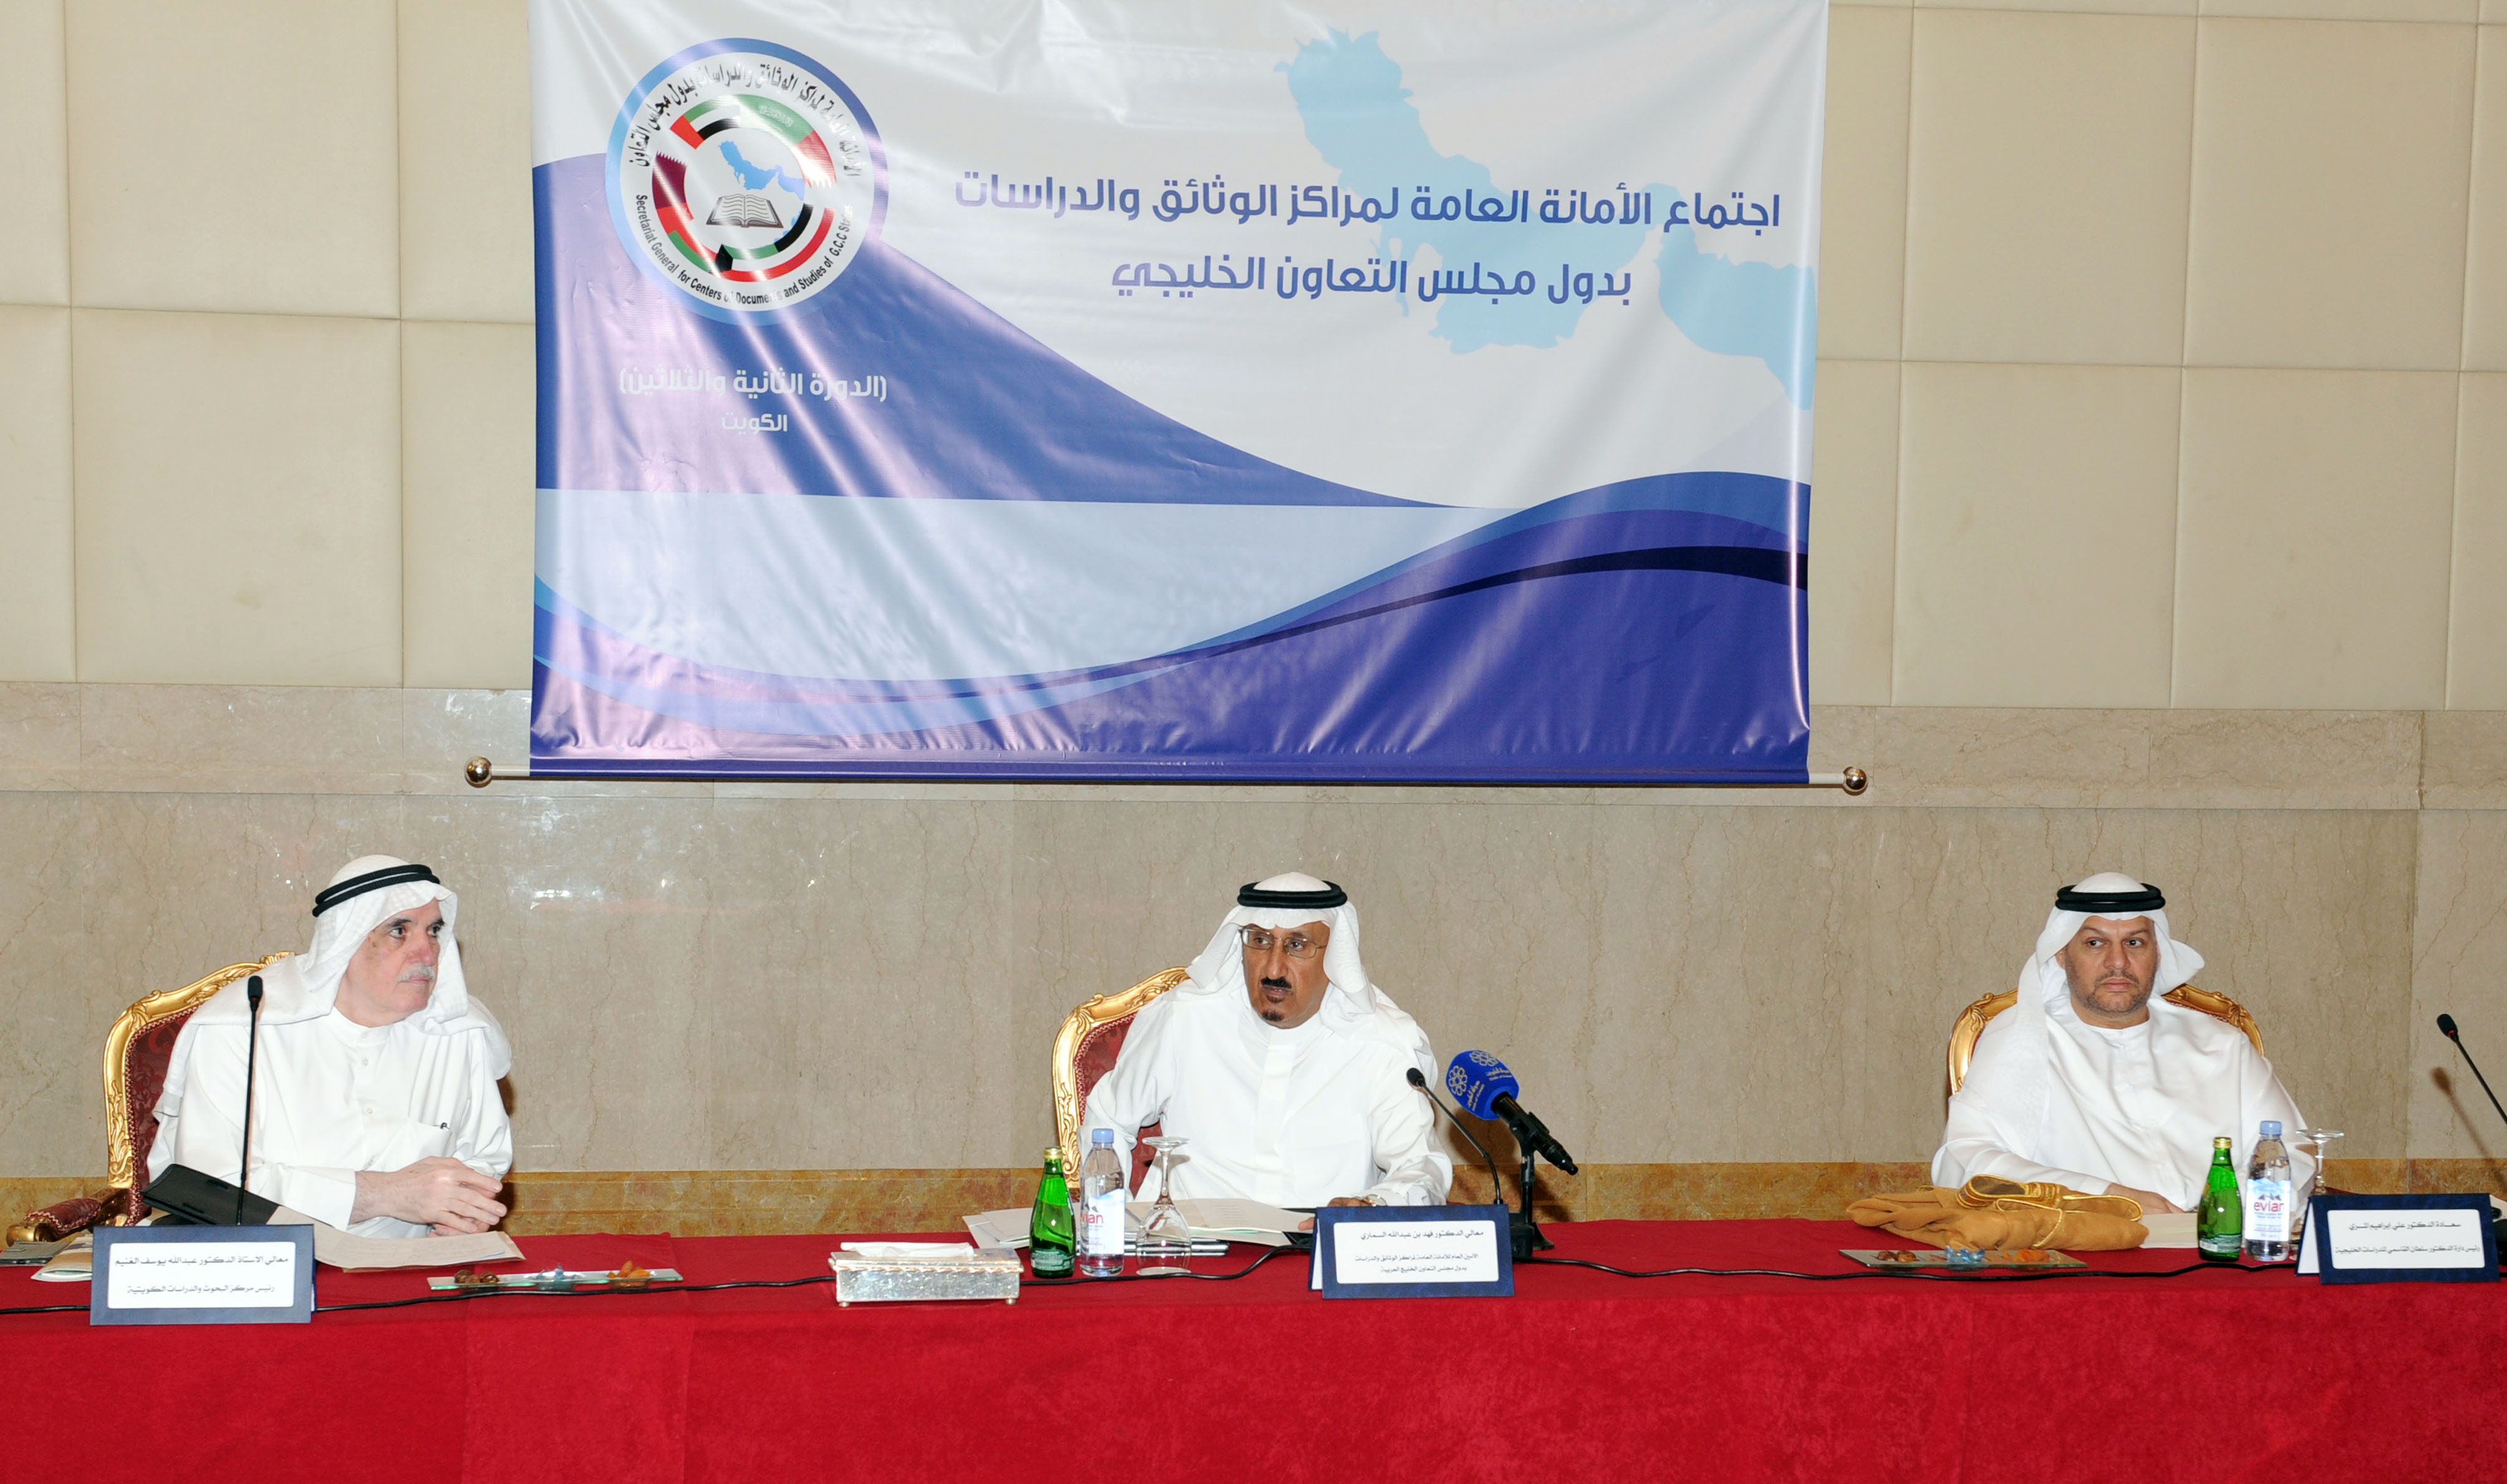 The 32nd session of the GCC Documents and Studies Centers kicked off this morning